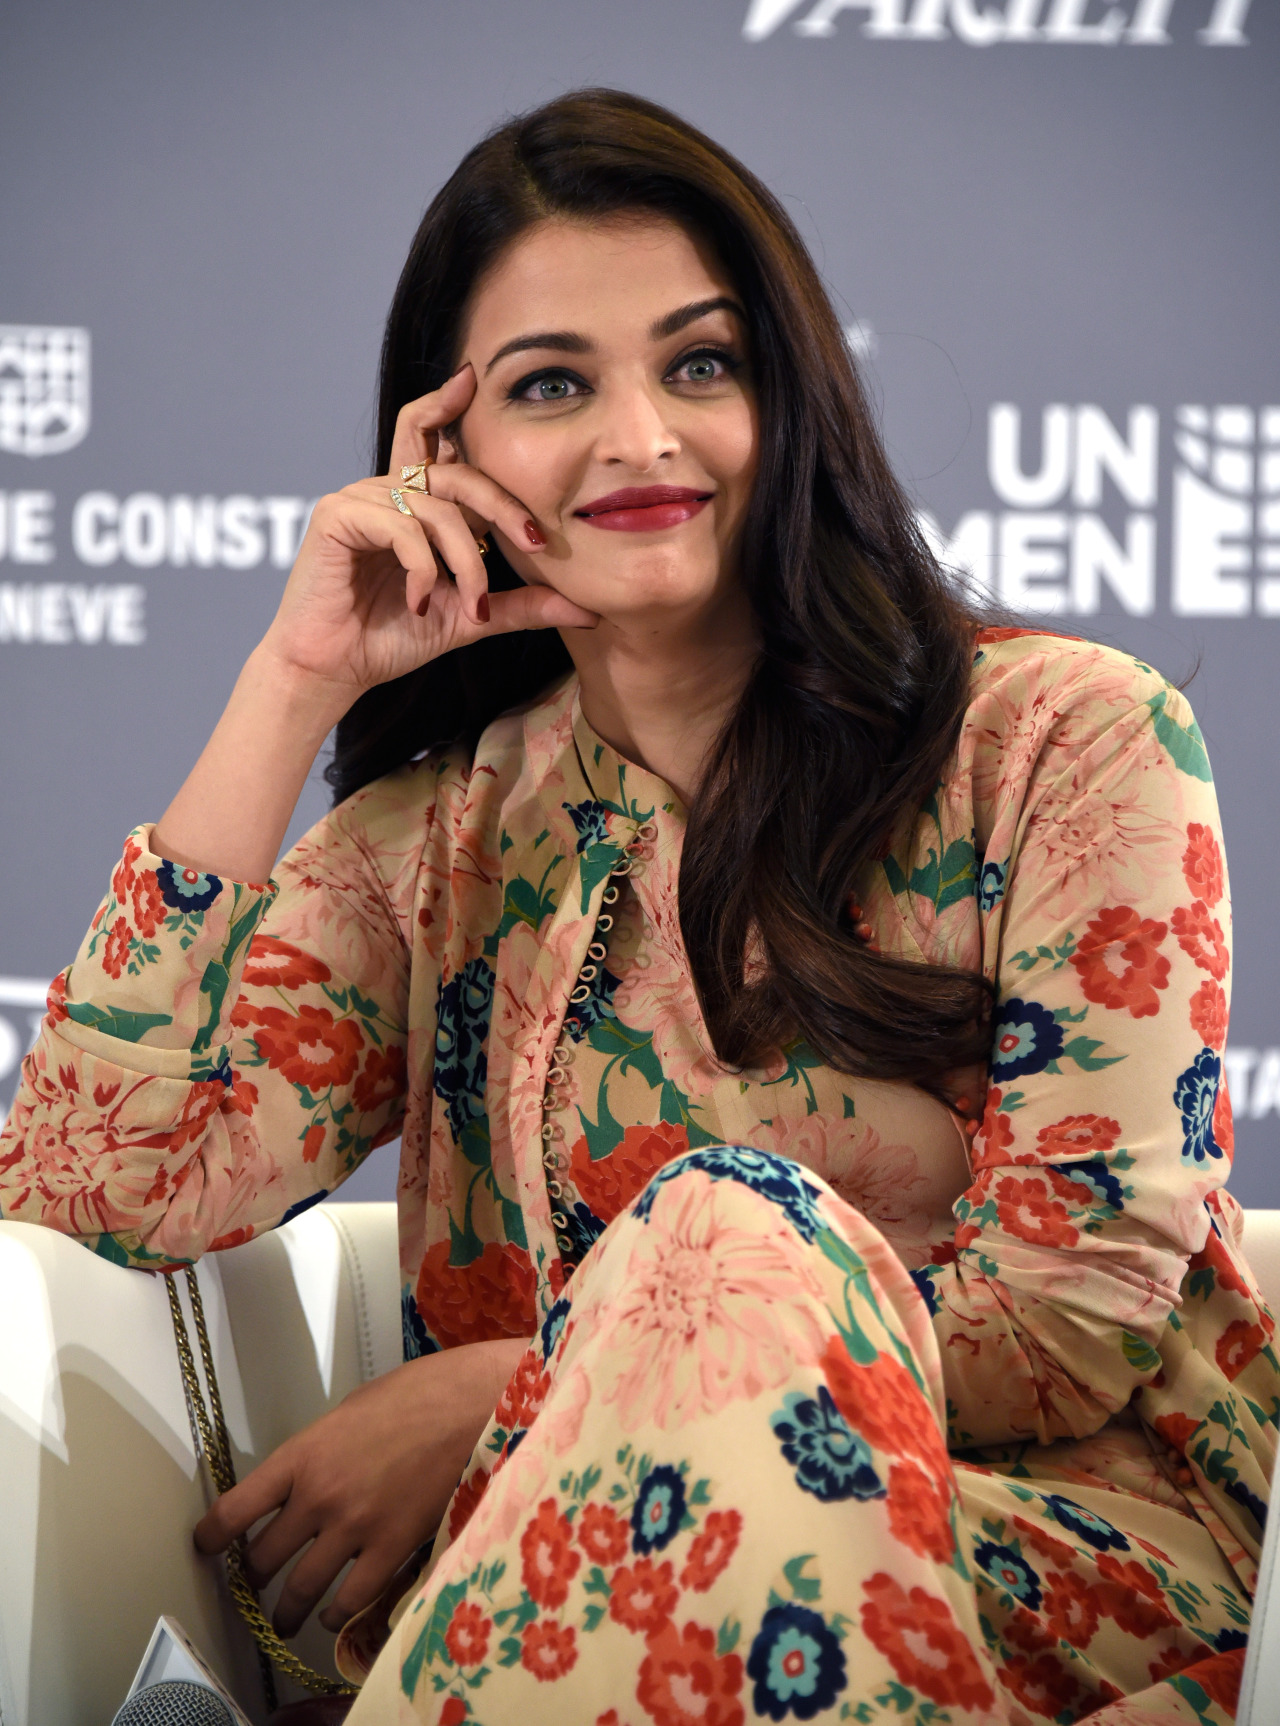 celebritiesofcolor:

Aishwarya Rai attends the Variety Celebration of UN Women at Radisson Blu on May 16, 2015 in Cannes, France.